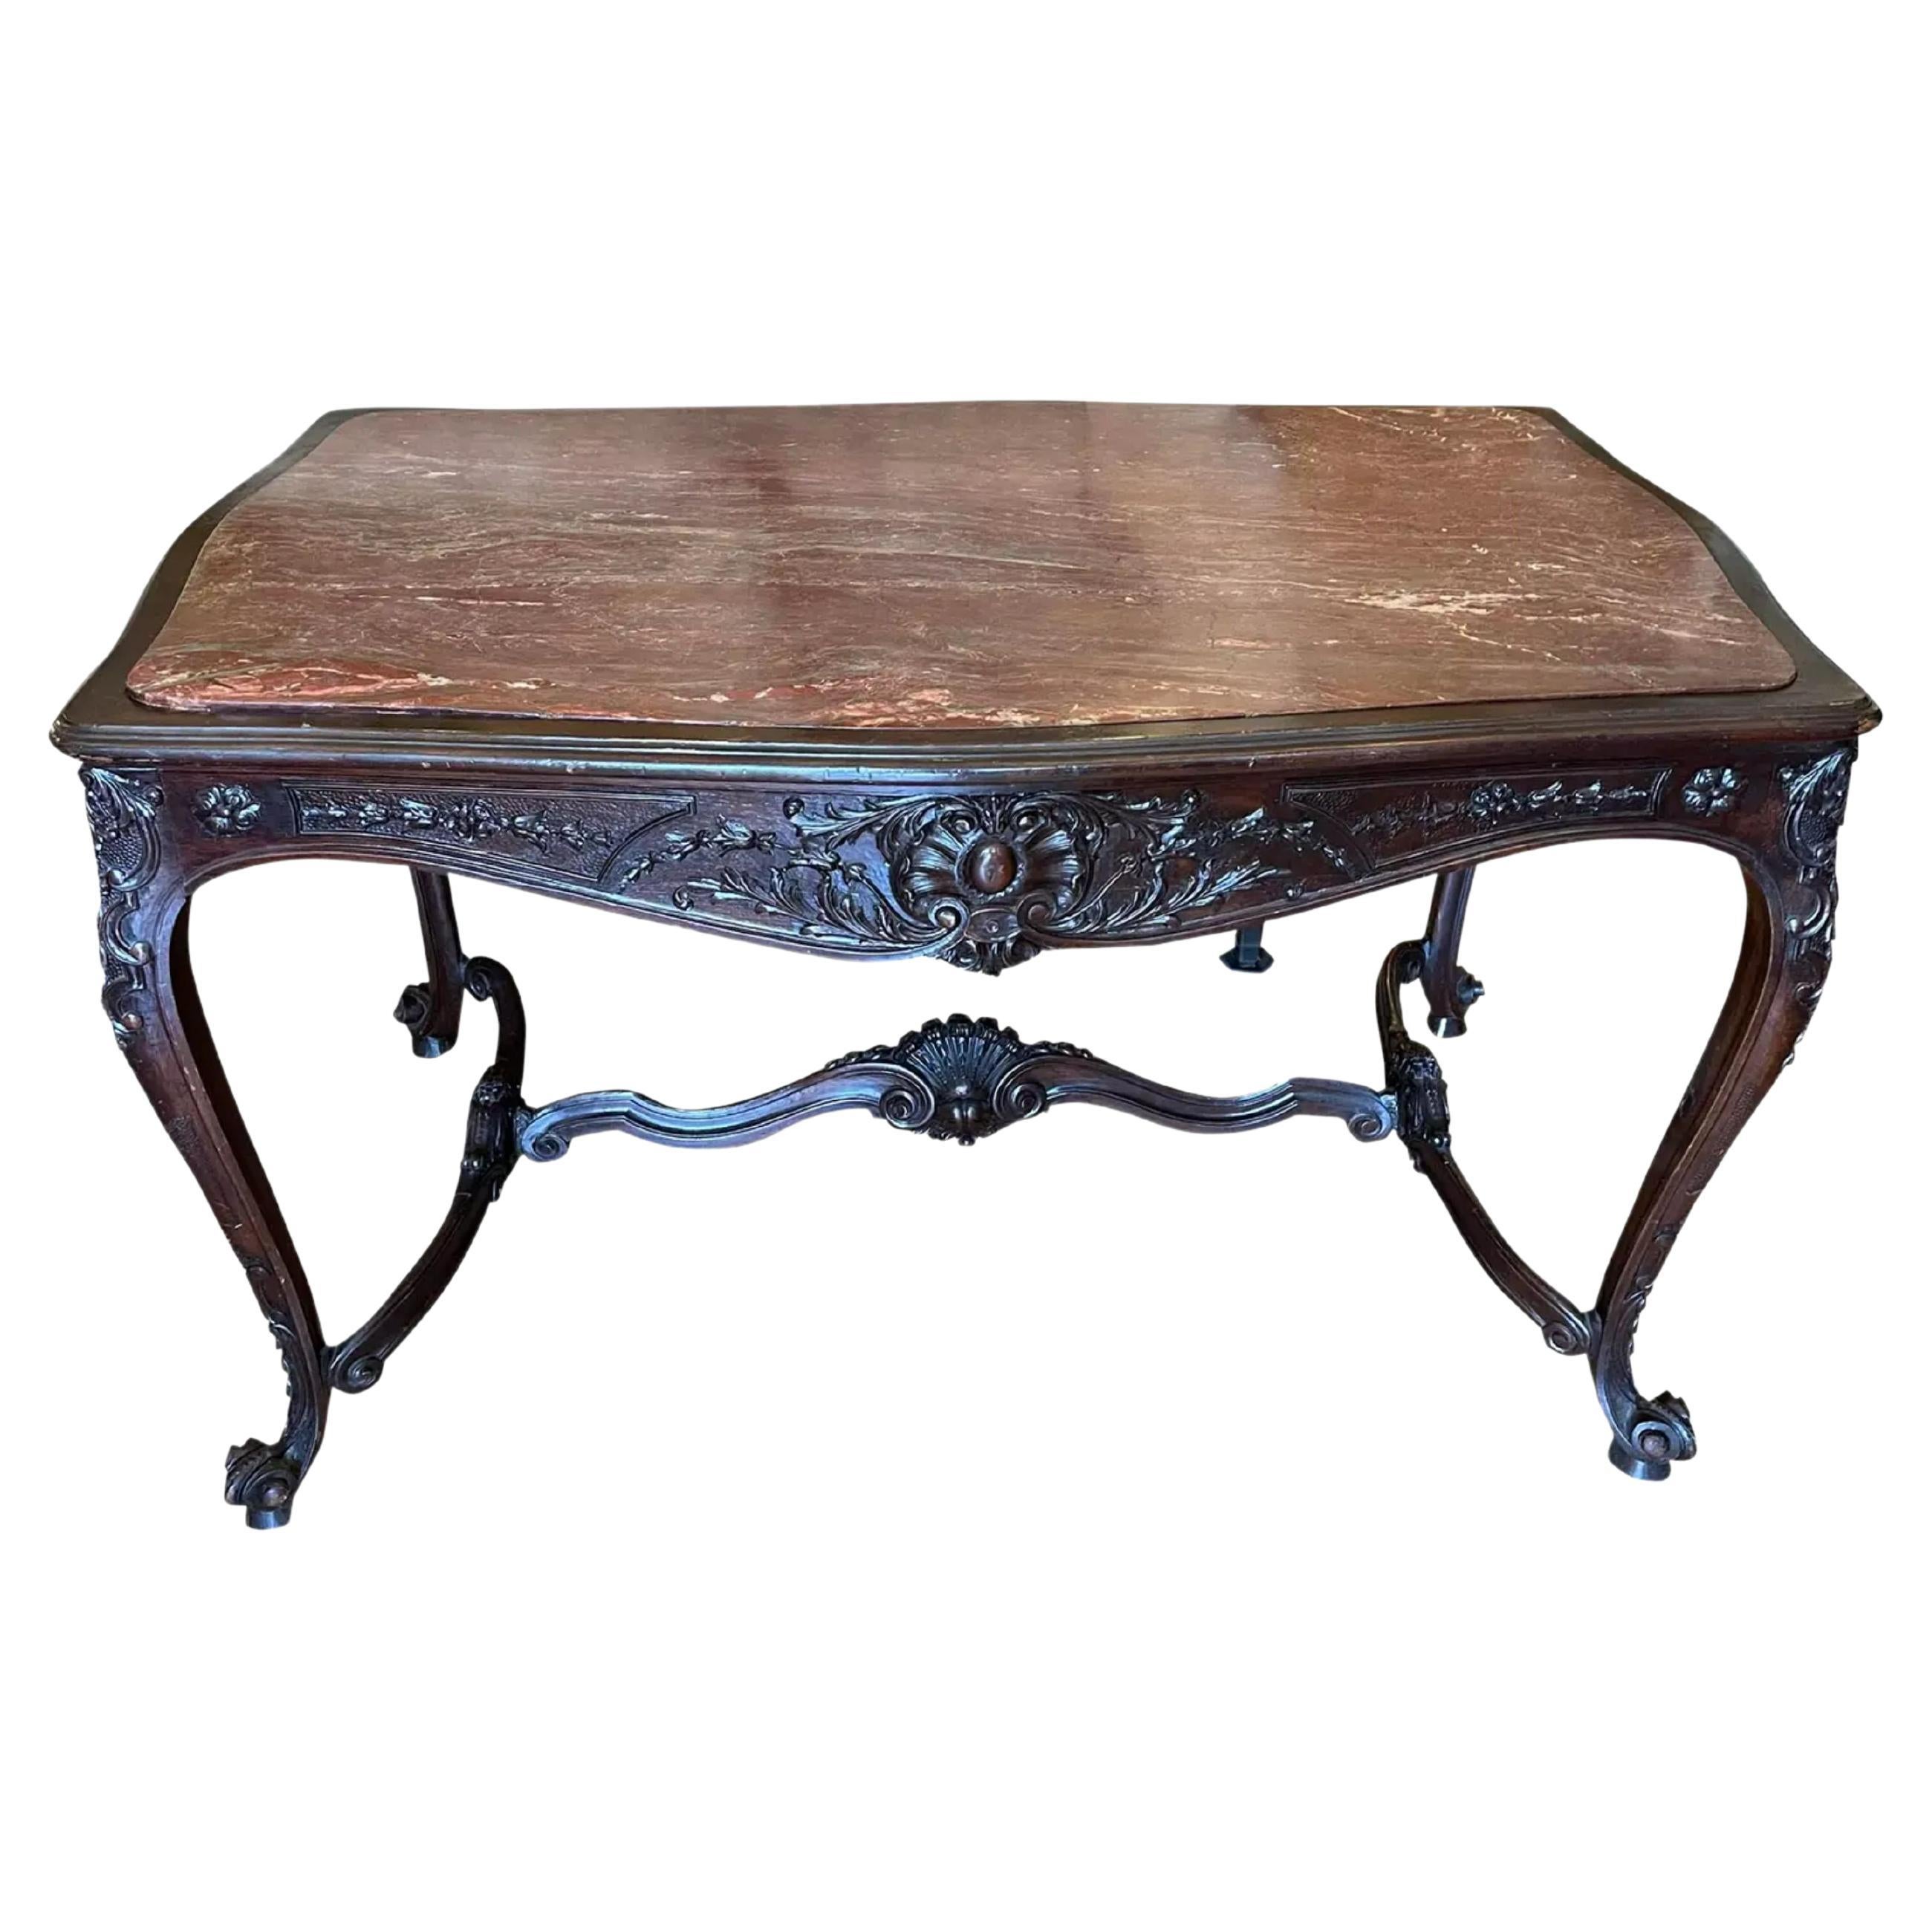 Antique French Provincial Marble Top Center Table, Early 19th Century For Sale